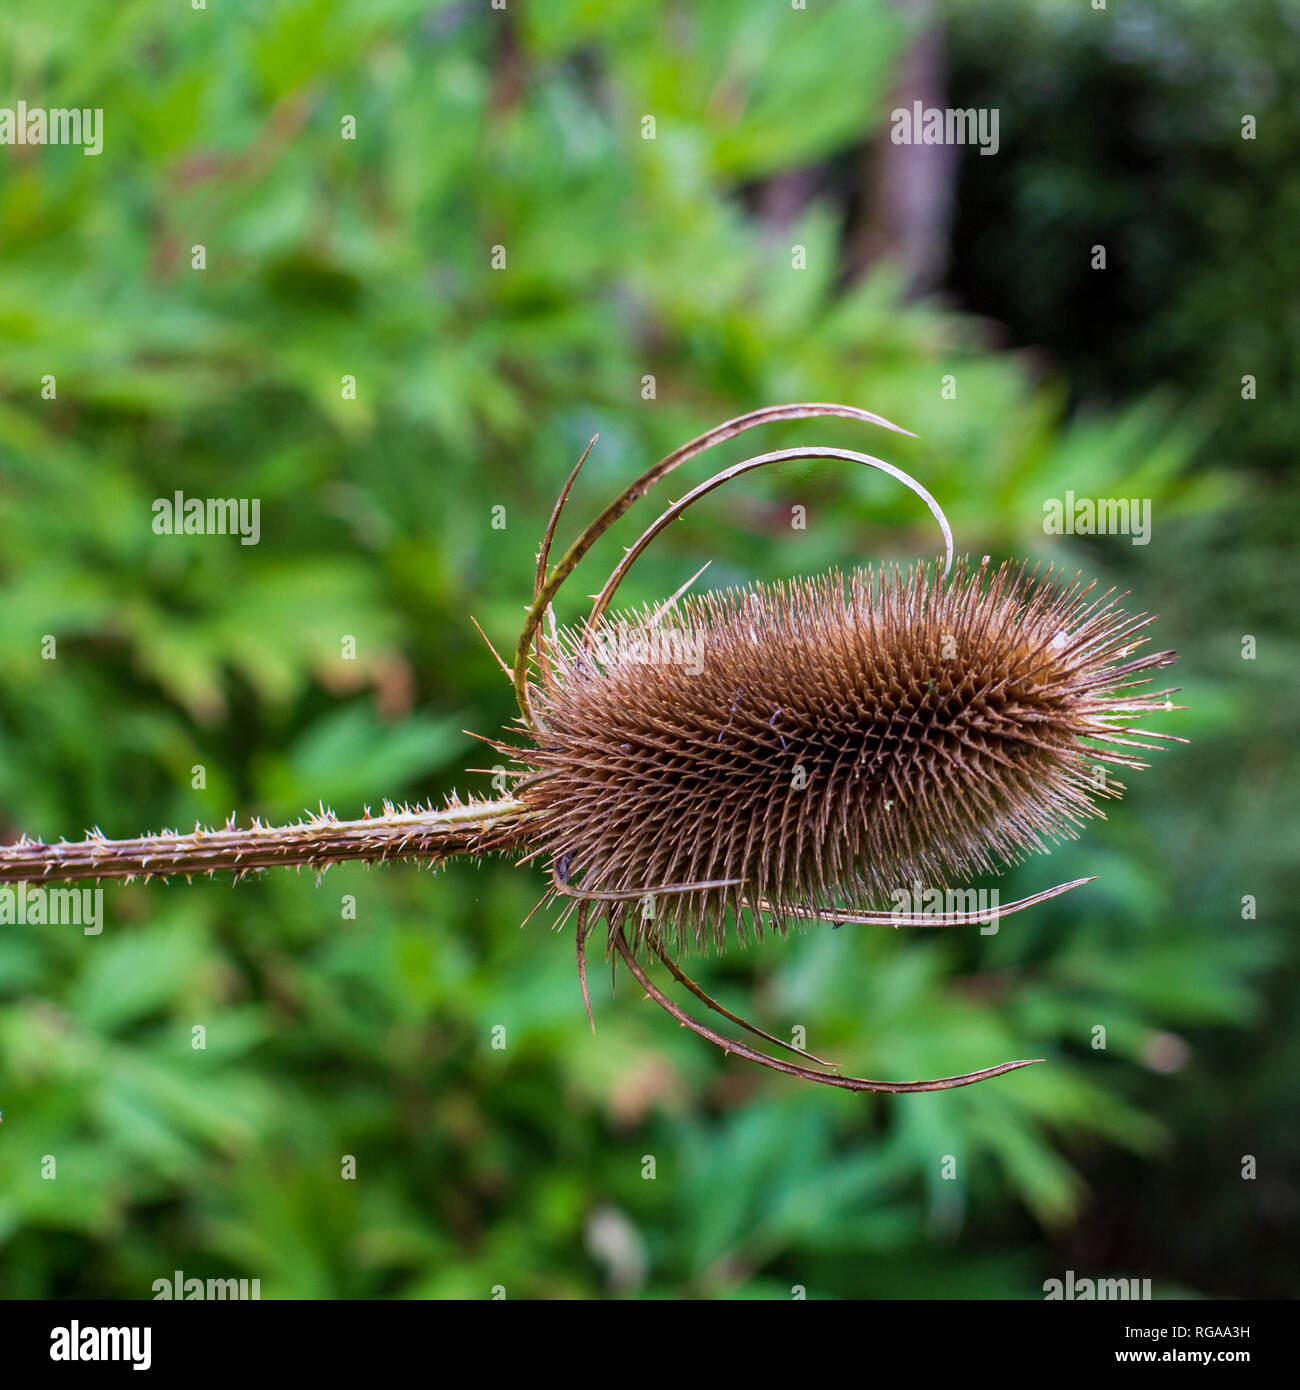 A close up macro view of a dried teasel flower isolated against a green background Stock Photo